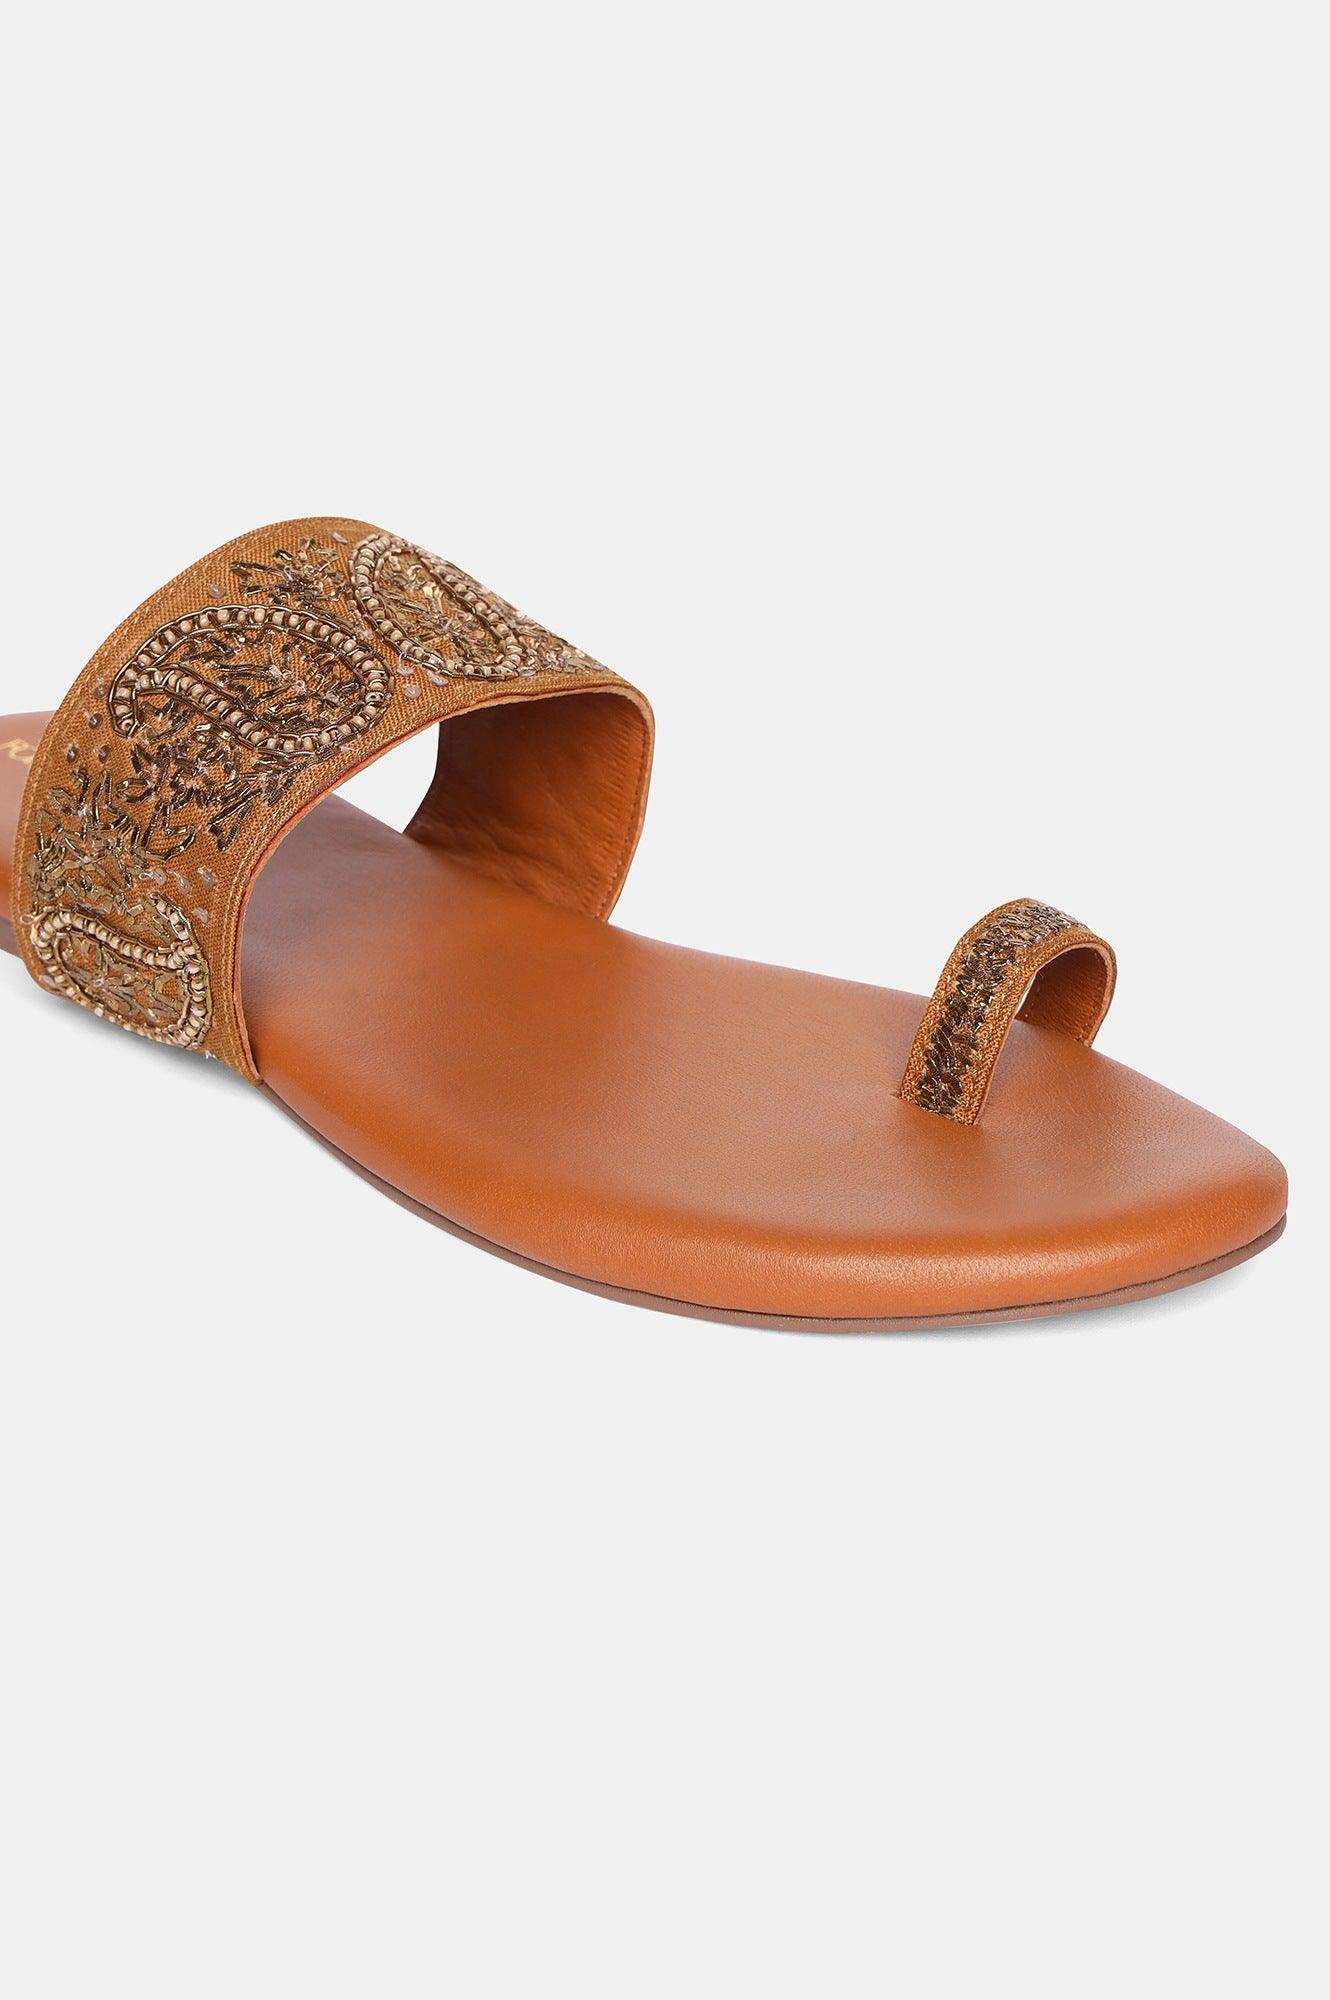 Mustard Round Toe Embroidered Flat-Sgul - wforwoman